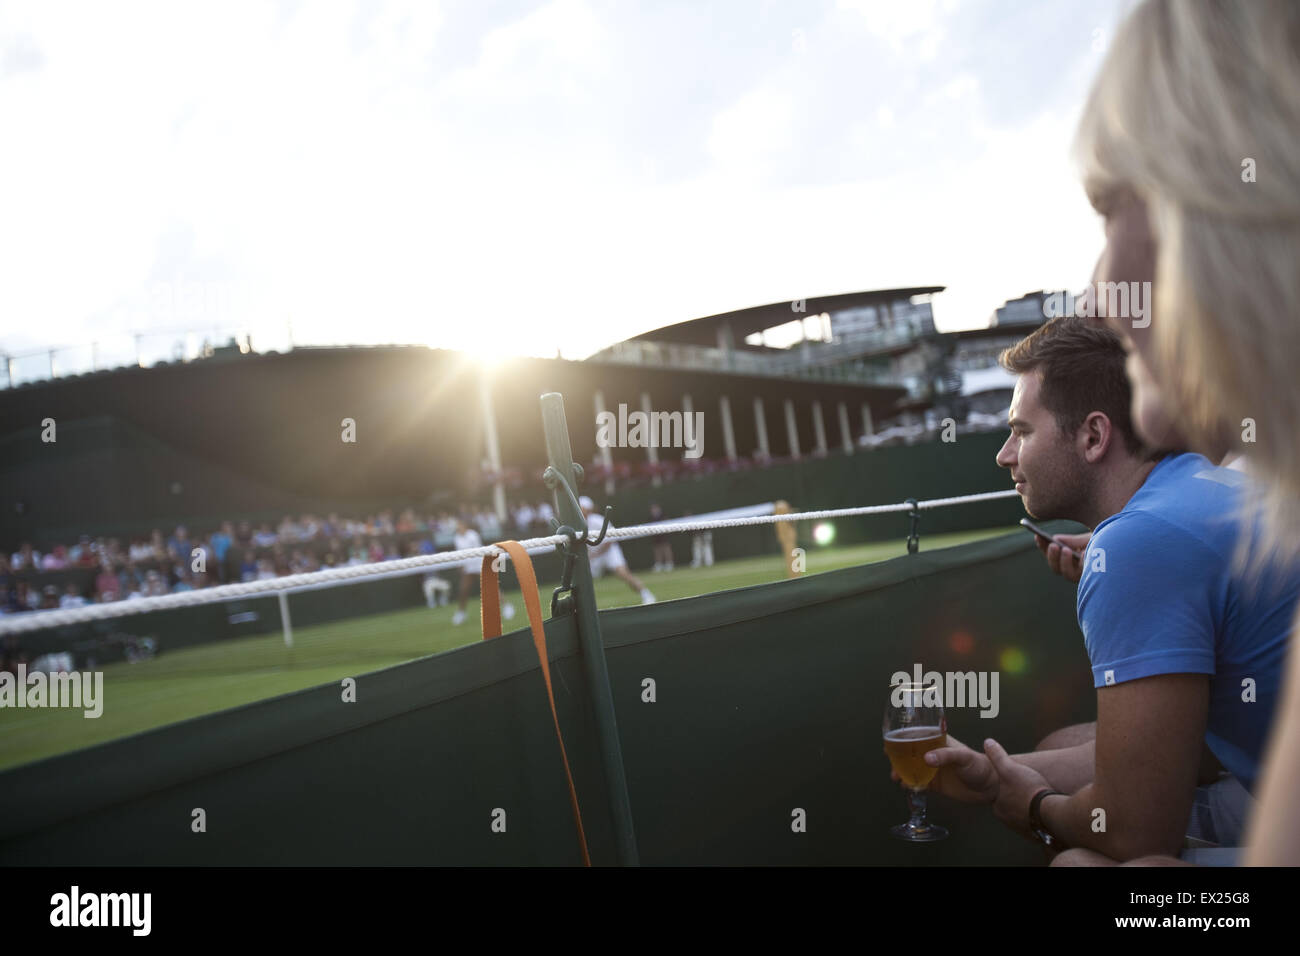 London, UK. 3rd July, 2015. Spectators at Wimbledon.The Championships, Wimbledon or simply Wimbledon, is the oldest tennis tournament in the world, and is widely considered the most prestigious. It has been held at the All England Club in Wimbledon, London since 1877, London, UK. © Veronika Lukasova/ZUMA Wire/Alamy Live News Stock Photo